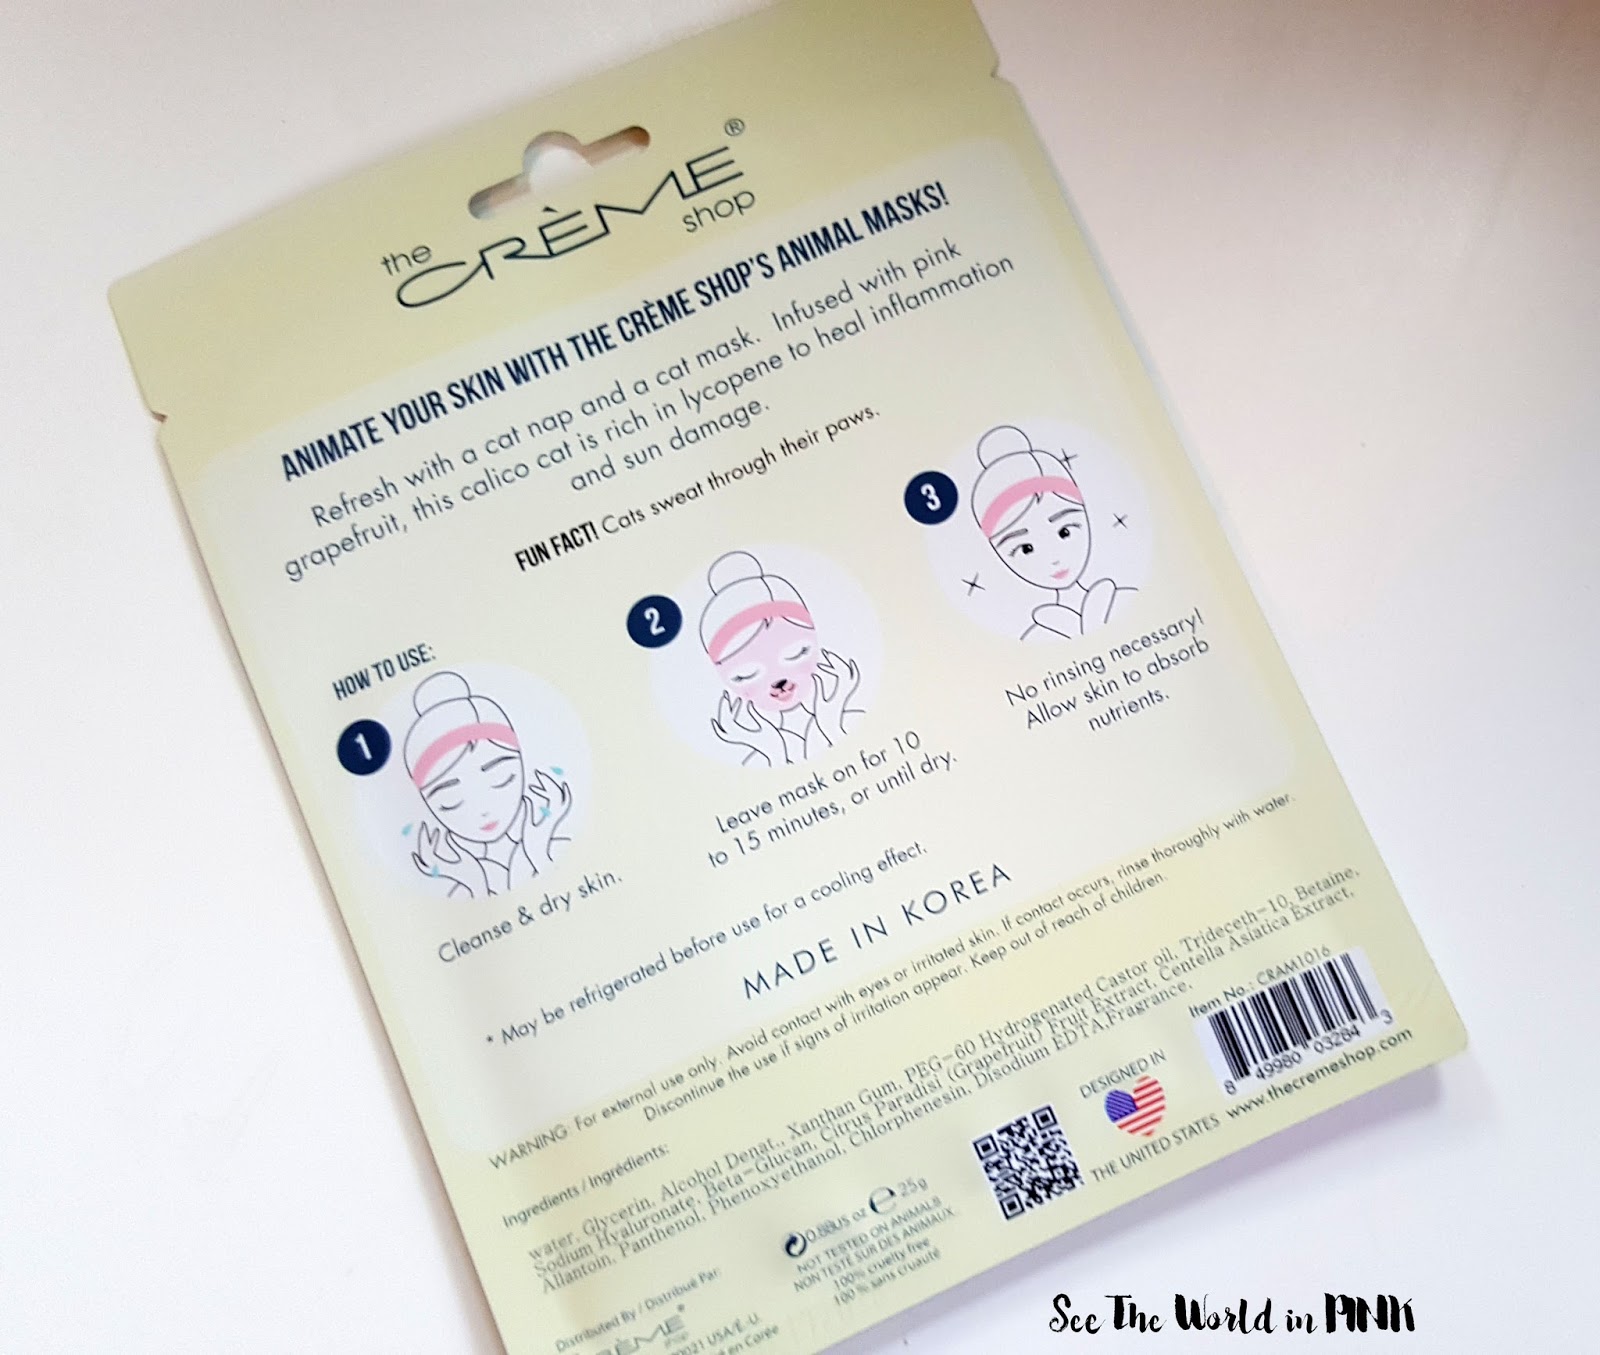 The Creme Shop Calm Down, Skin! Kitty Face Mask Review